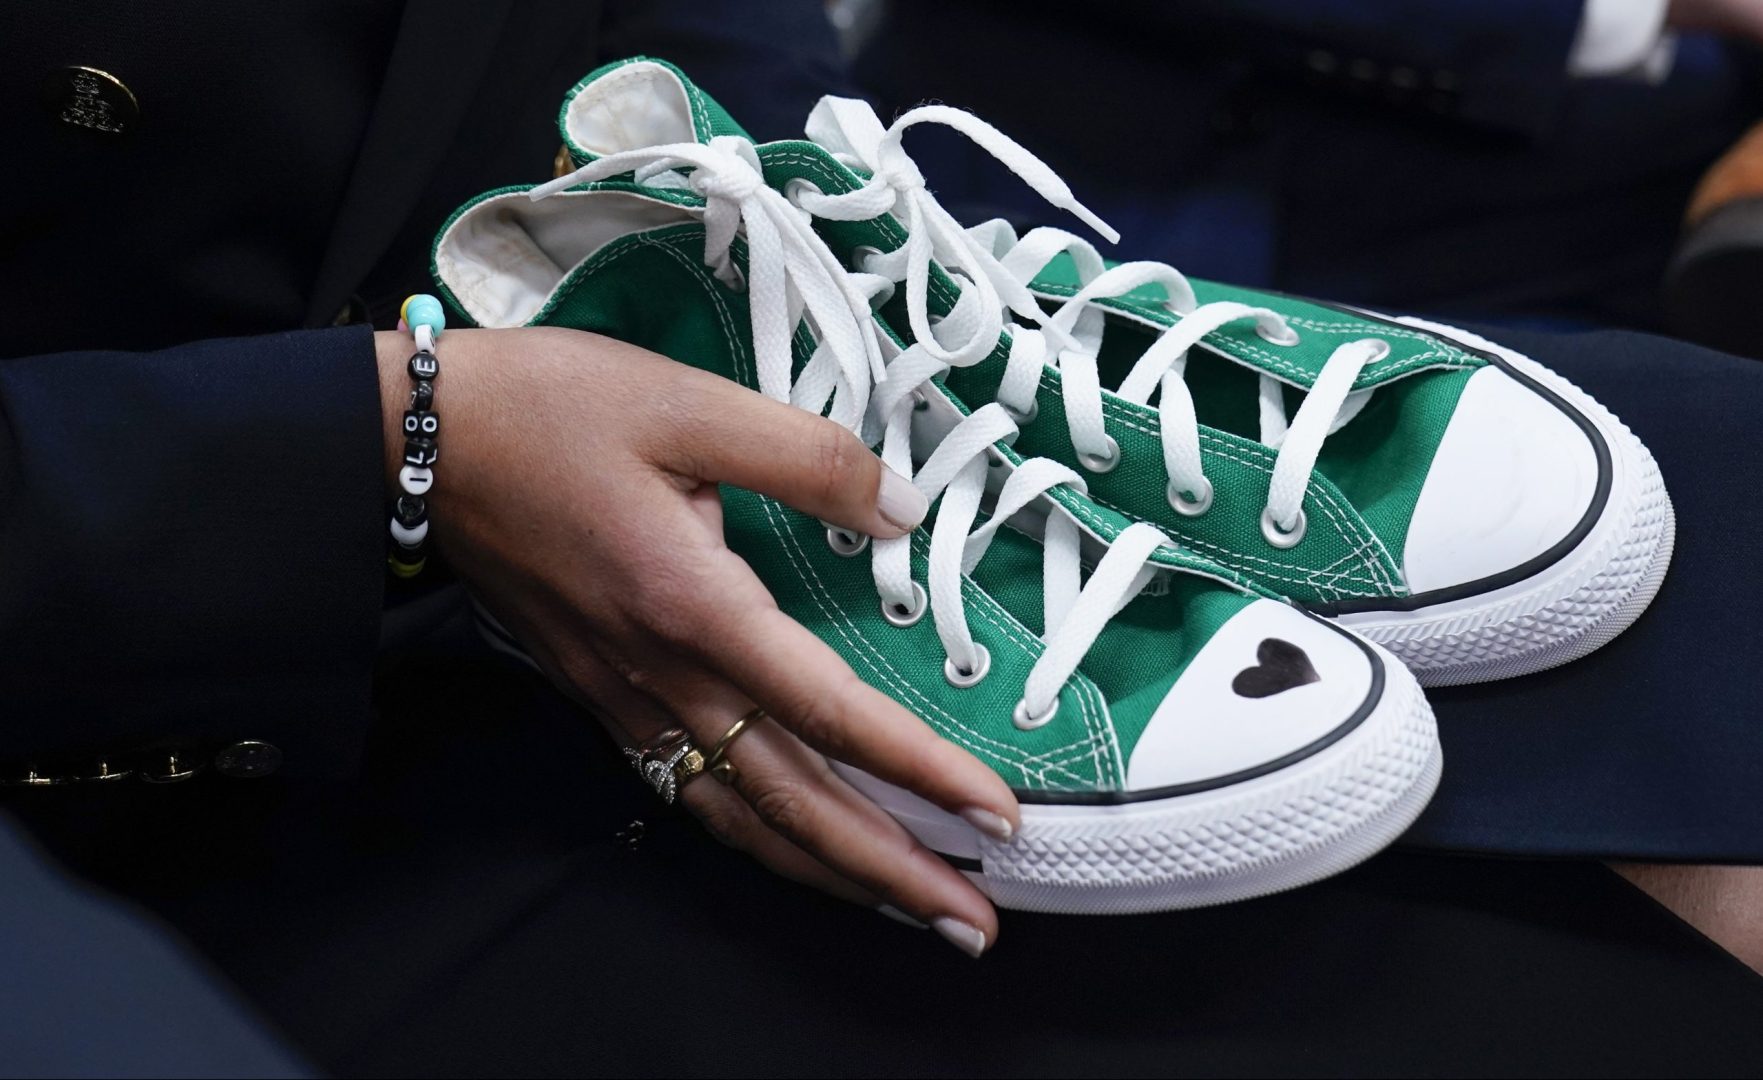 Camila Alves McConaughey holds the lime green Converse tennis shoes that were worn by Uvalde shooting victim Maite Yuleana Rodriguez, 10, as Matthew McConaughey, a native of Uvalde, Texas, joins White House press secretary Karine Jean-Pierre for the daily briefing at the White House in Washington, Tuesday, June 7, 2022. 